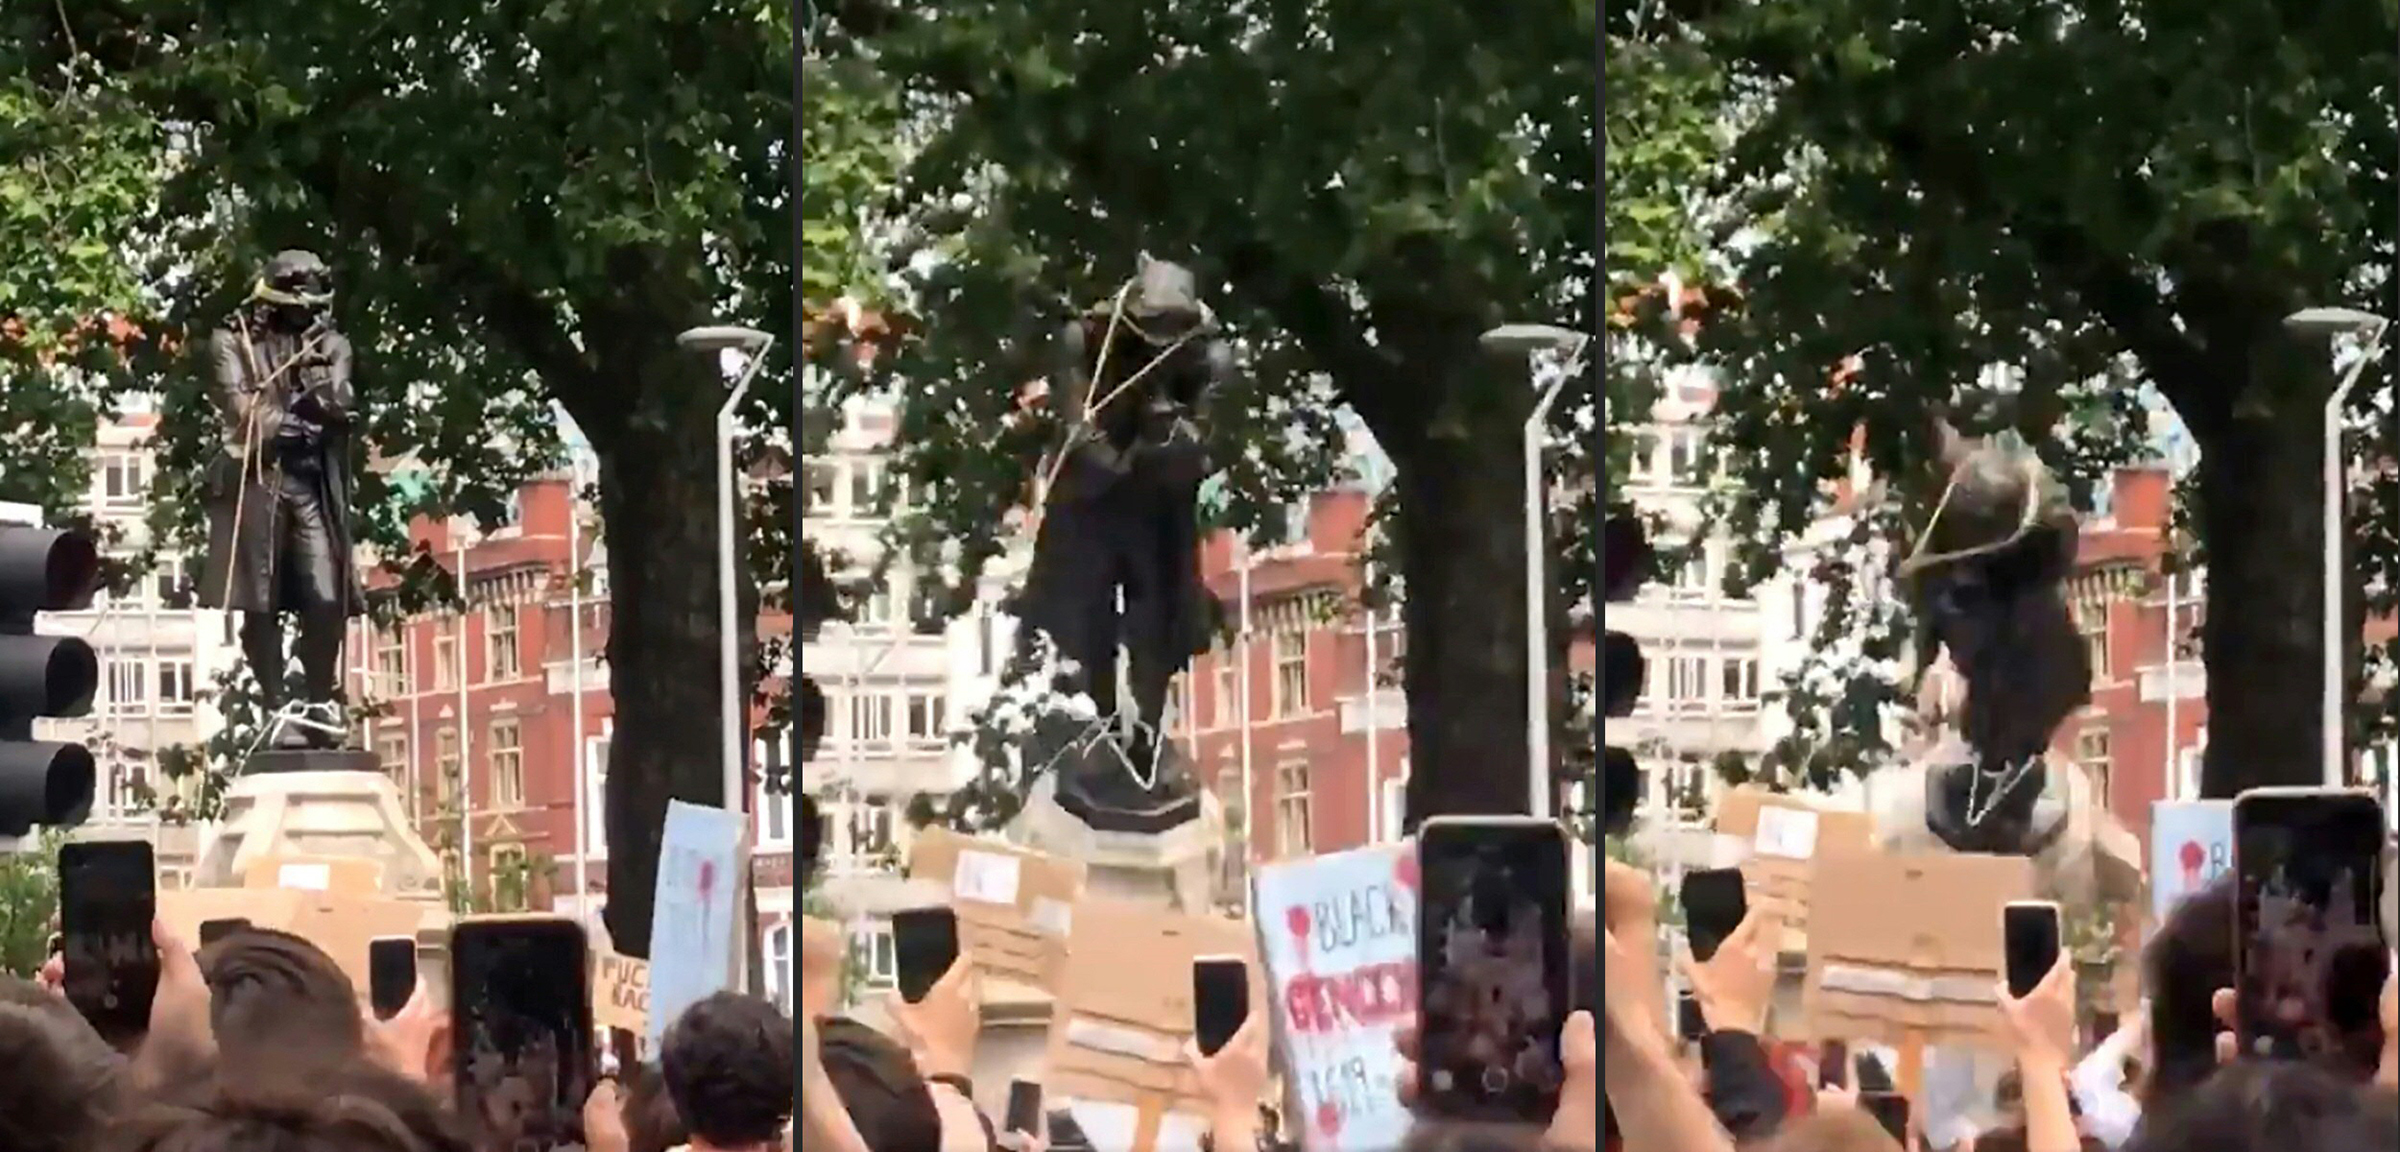 Protesters pulling down a statue of slave trader Edward Colston in Bristol, England, during a demonstration organized to show solidarity with the Black Lives Matter movement on June 7, 2020. (William Want/Twitter/AFP)